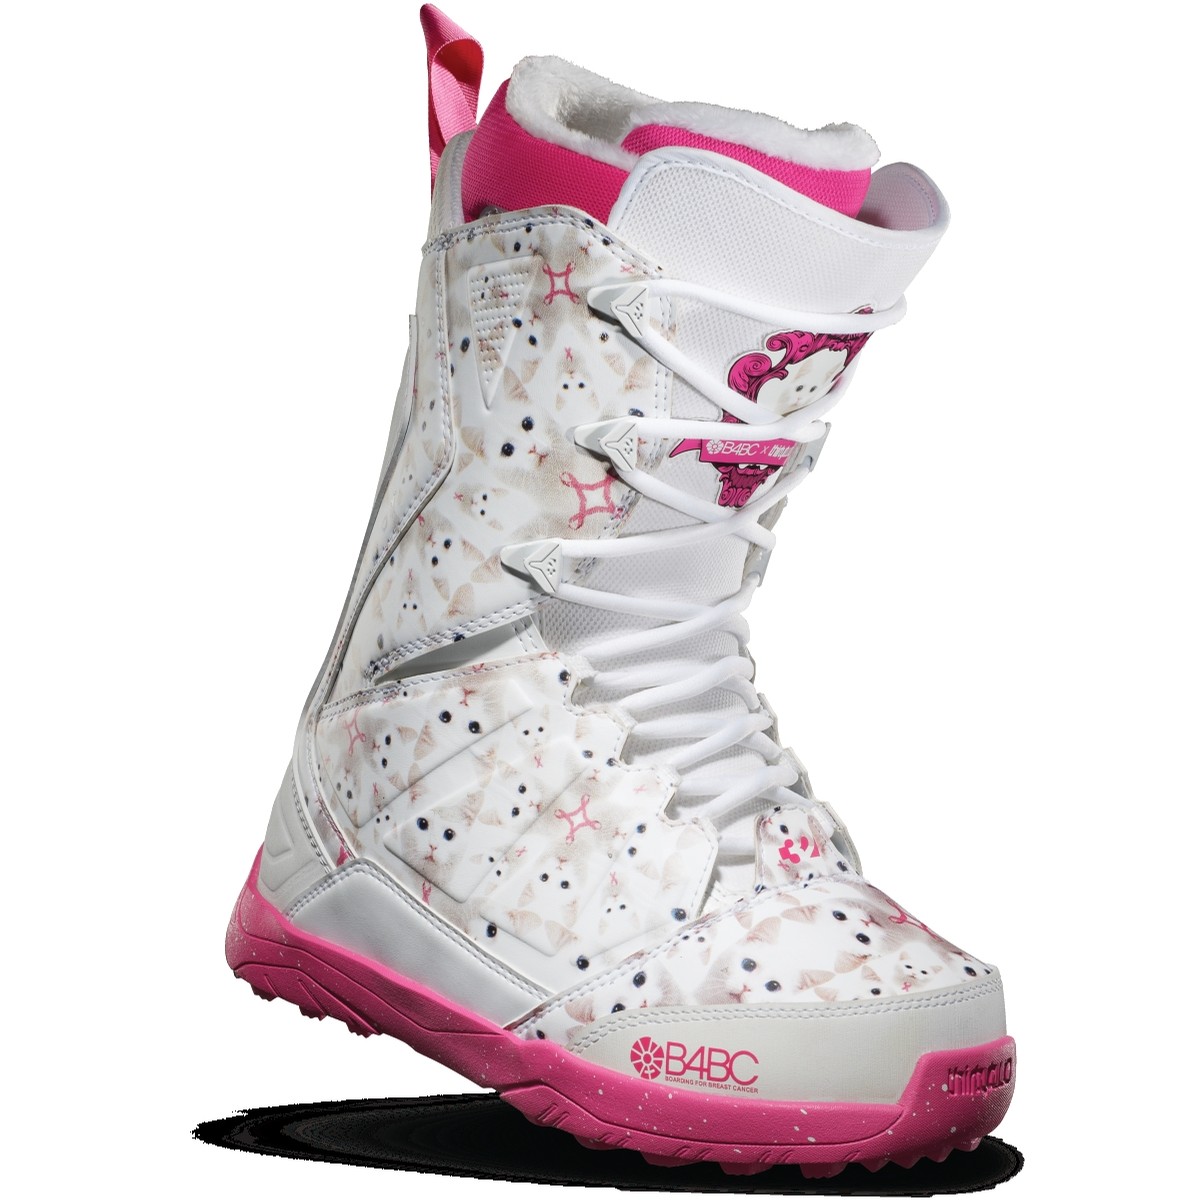 ThirtyTwo Women Lashed B4BC Snowboard Boots 7 White/Pink 